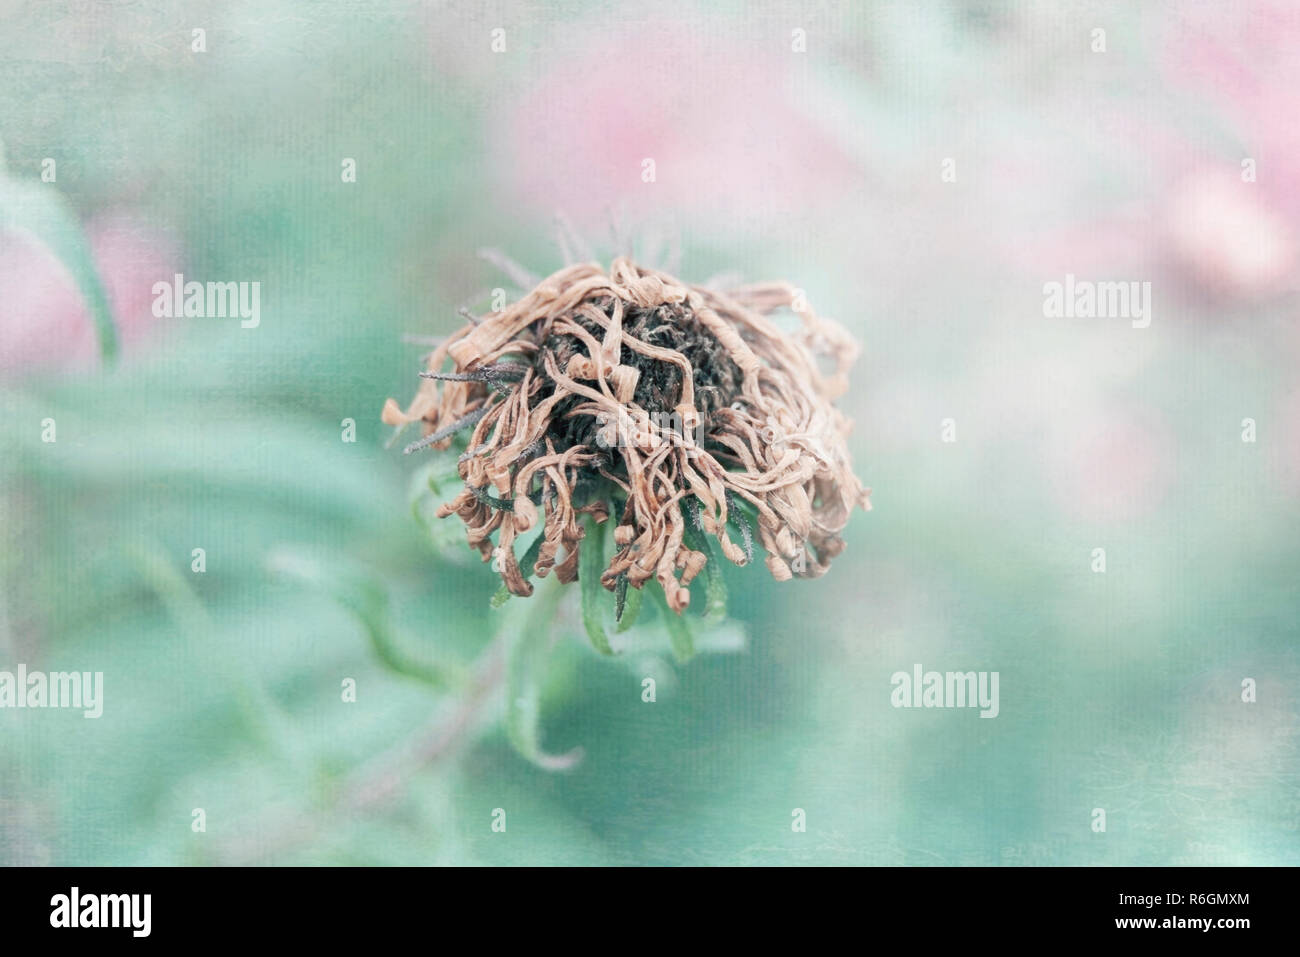 The country dried-up flower on a green background from leaves and pink colors Stock Photo